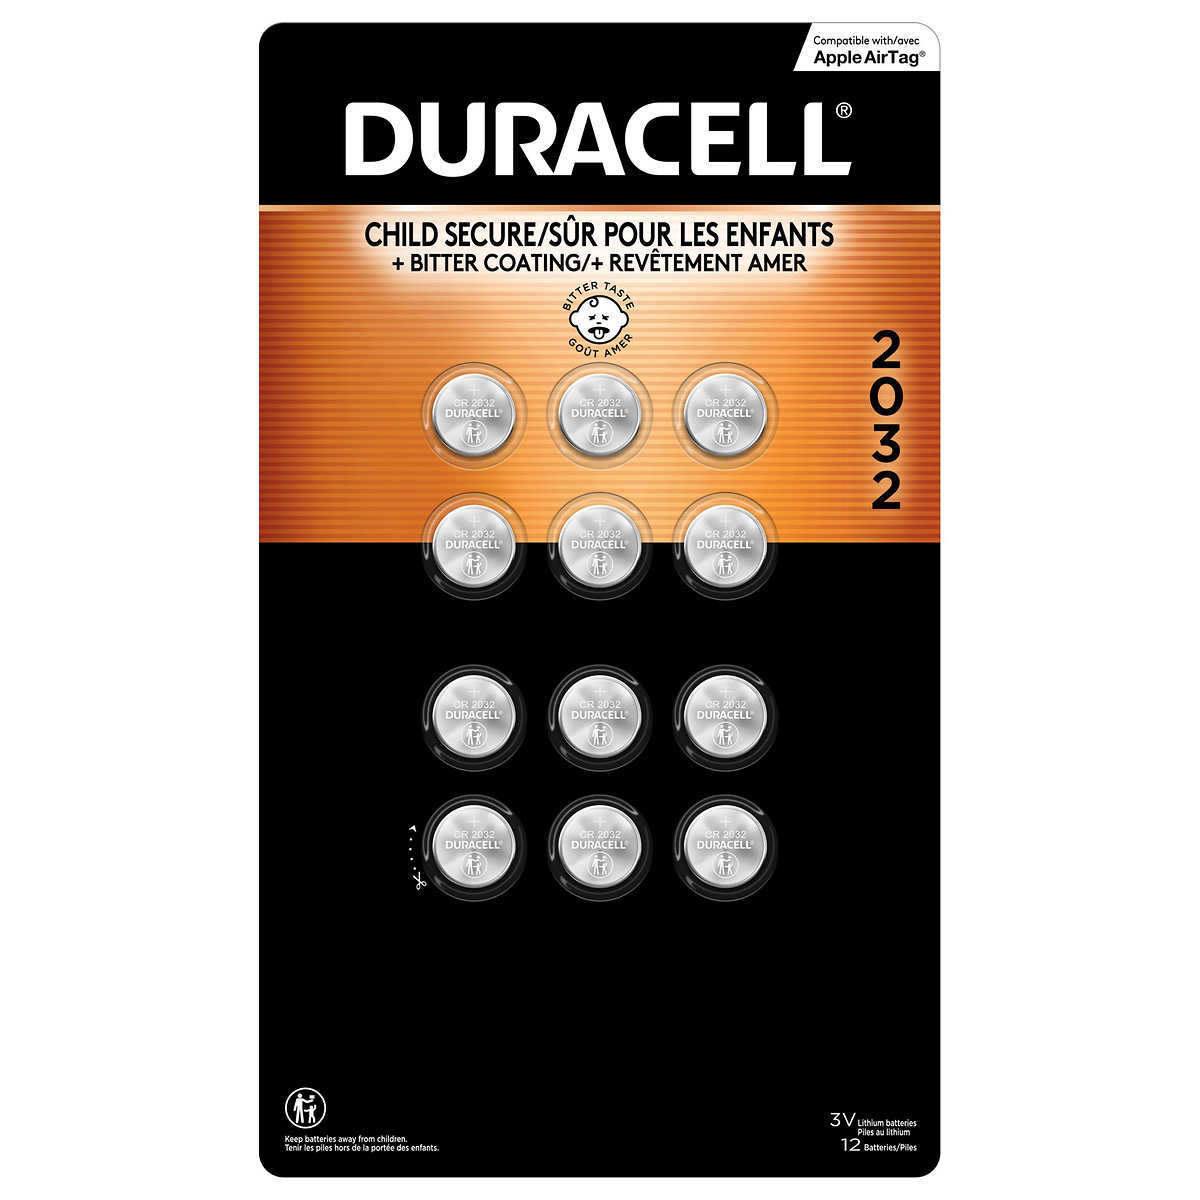 Duracell 2032 Coin/Button Cell Batteries - 1 Count for sale online